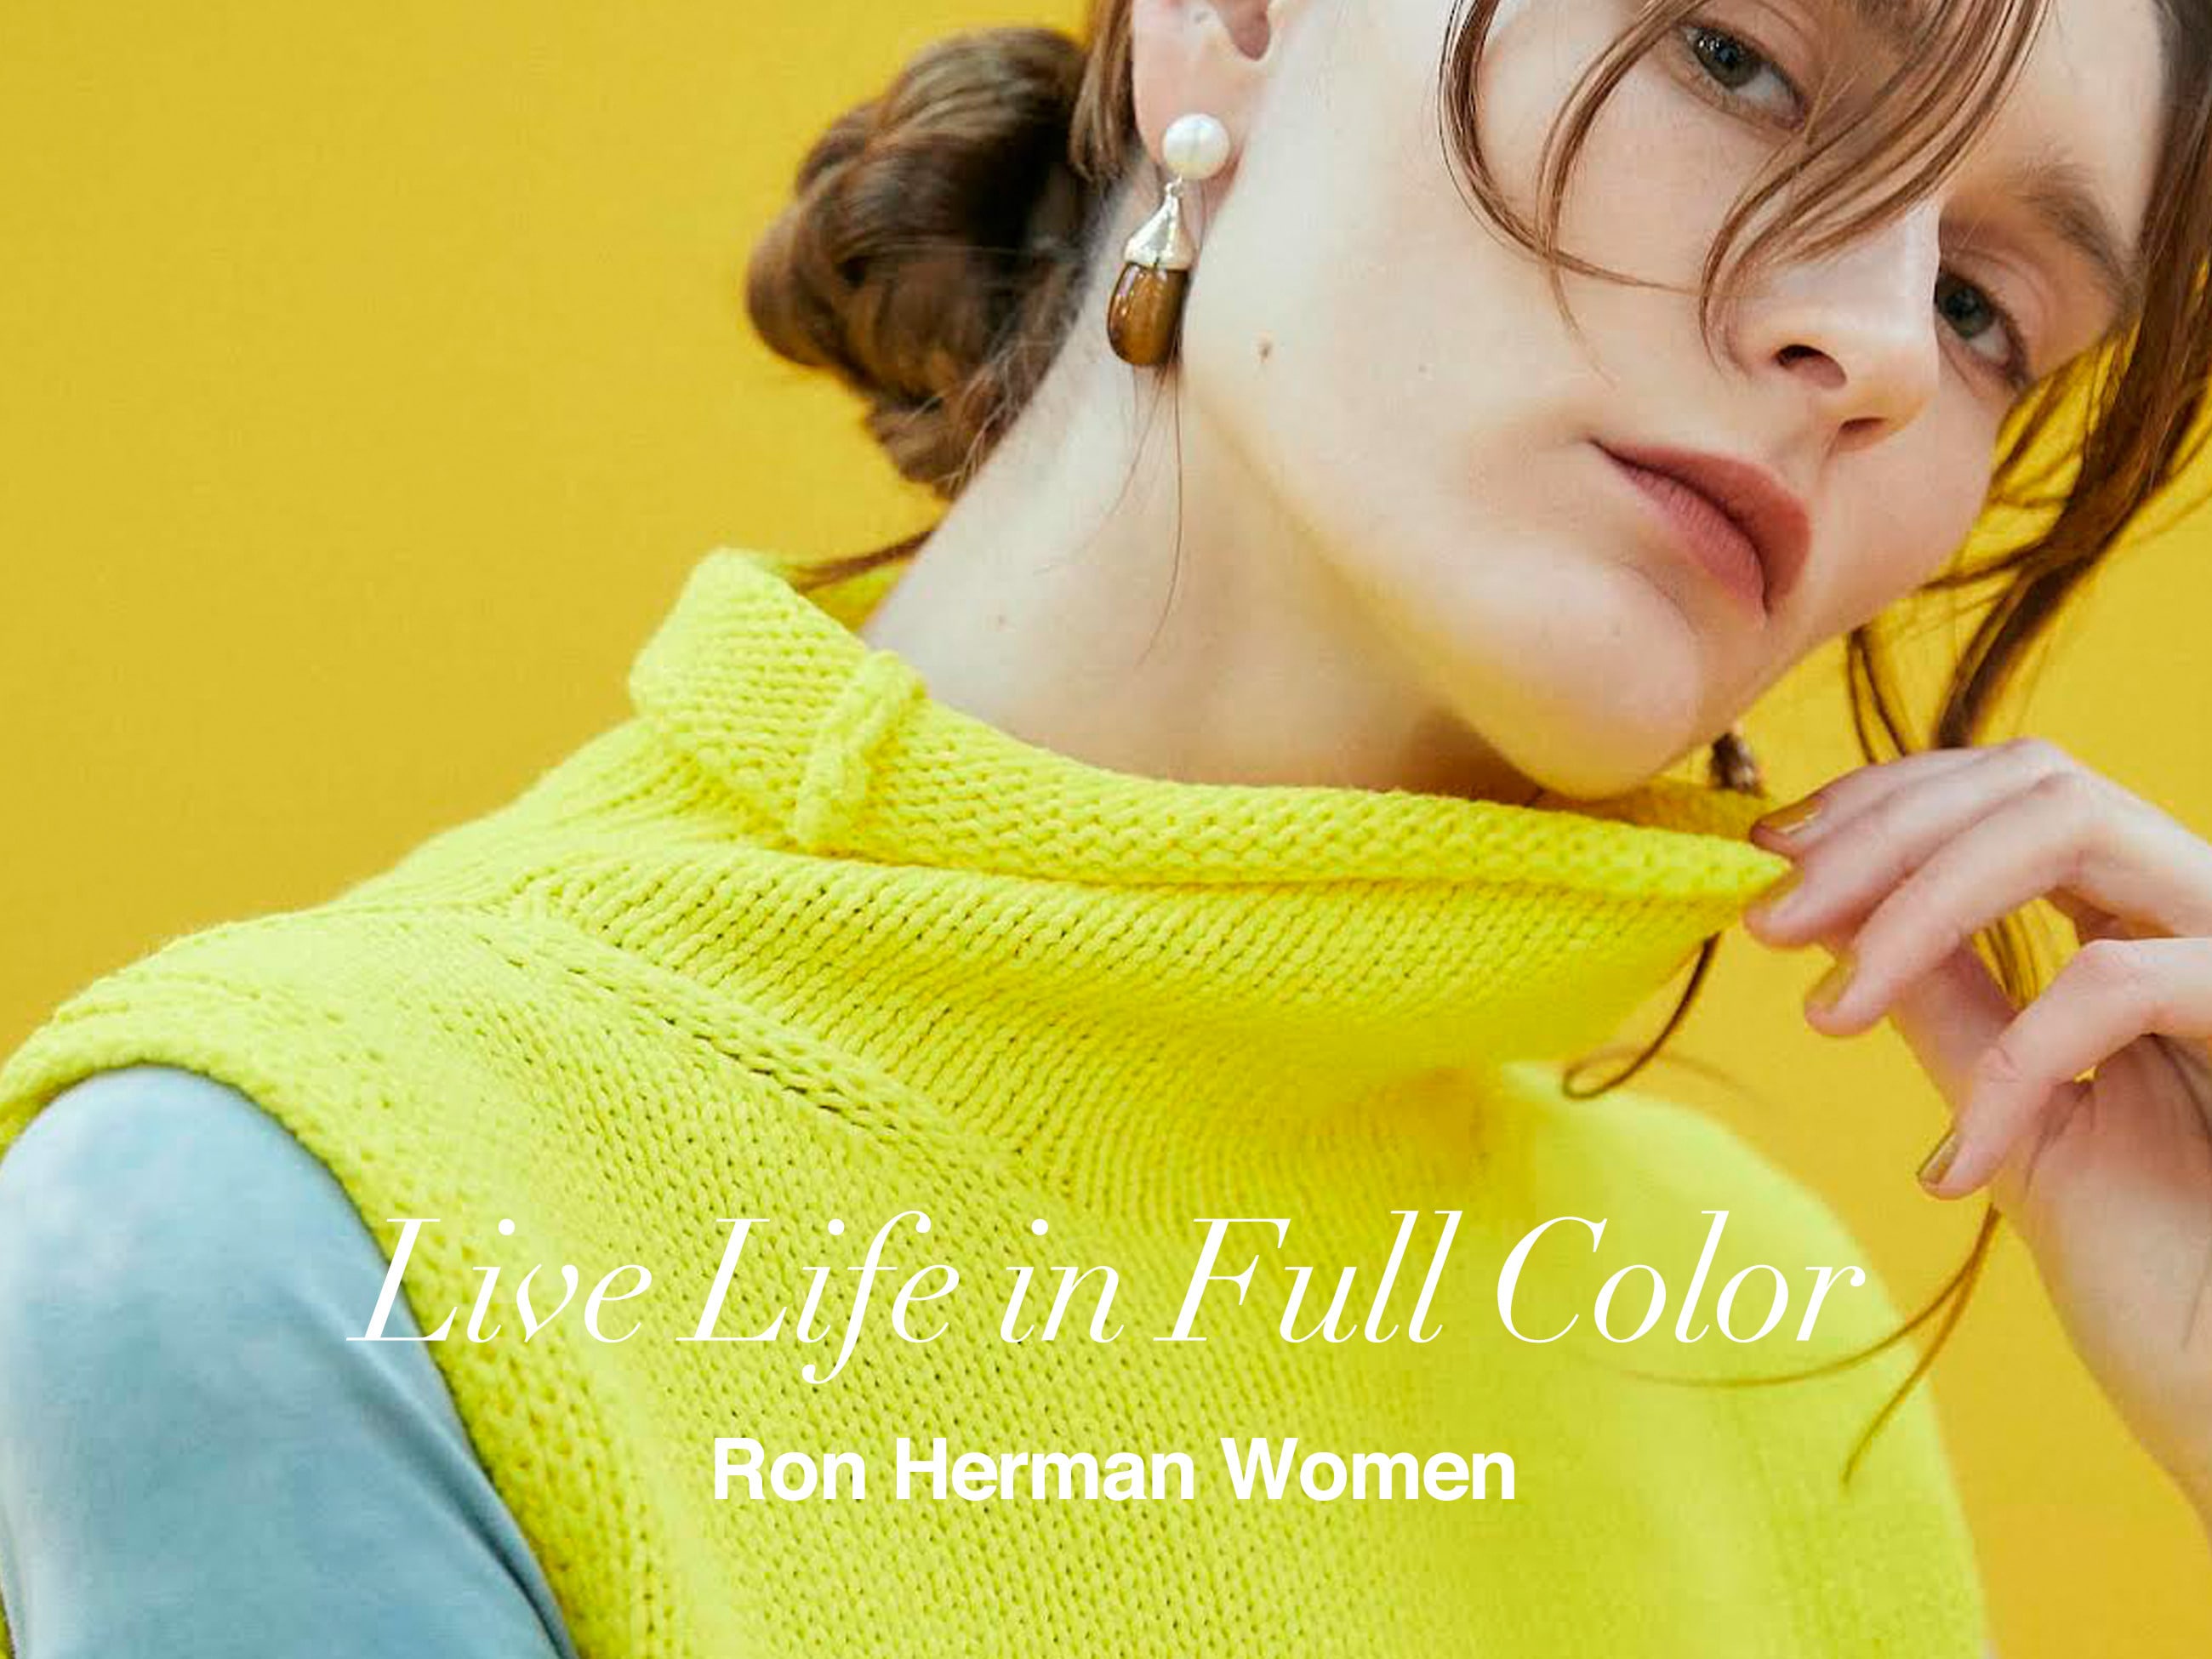 Live Life in Full Color for Ron Herman Women